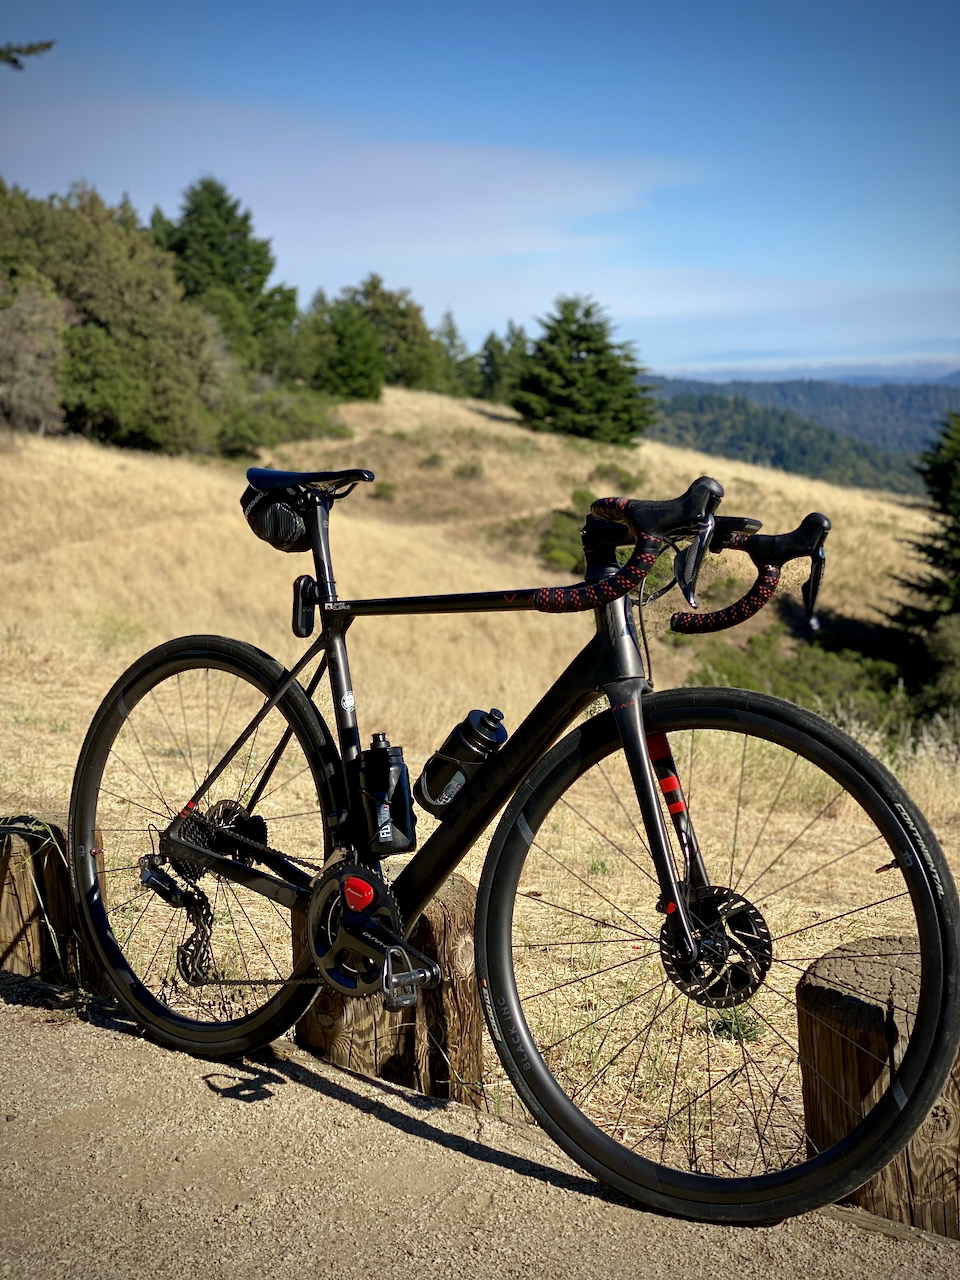 Portrait of a Factor O2 VAM bike at the Sempervirens viewpoint